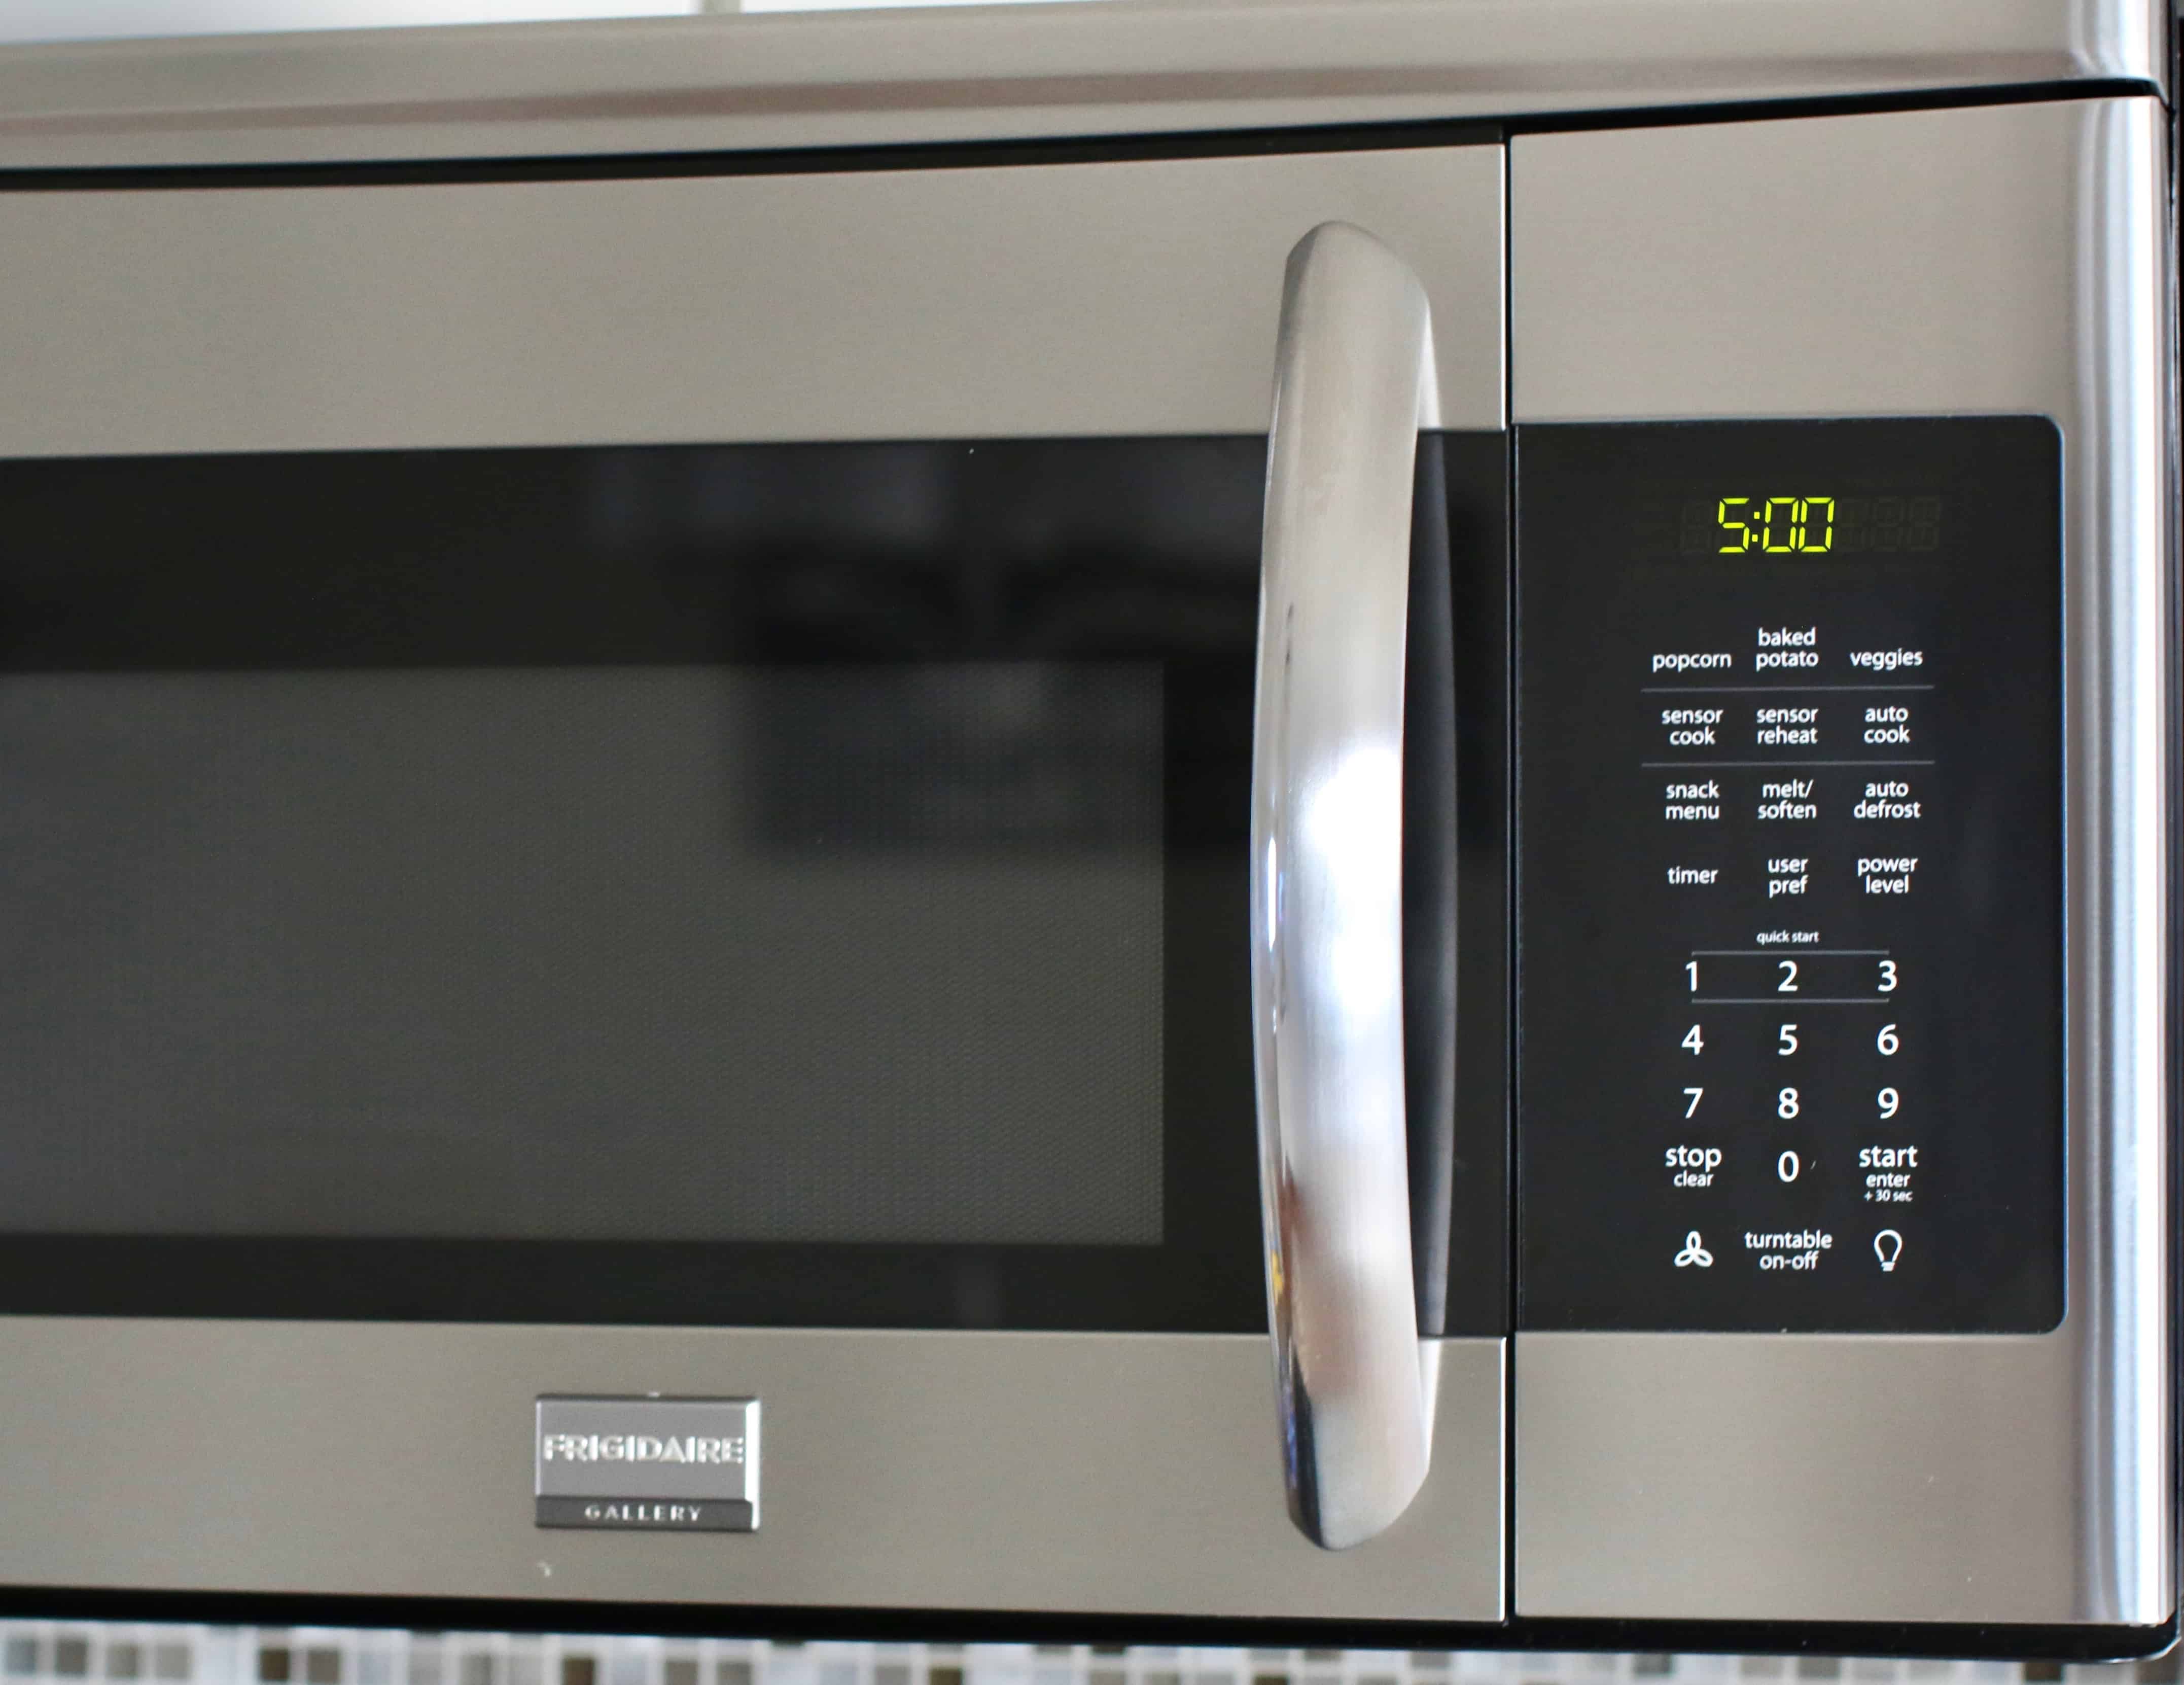 a microwave showing a 5 minute cooking time on the display.